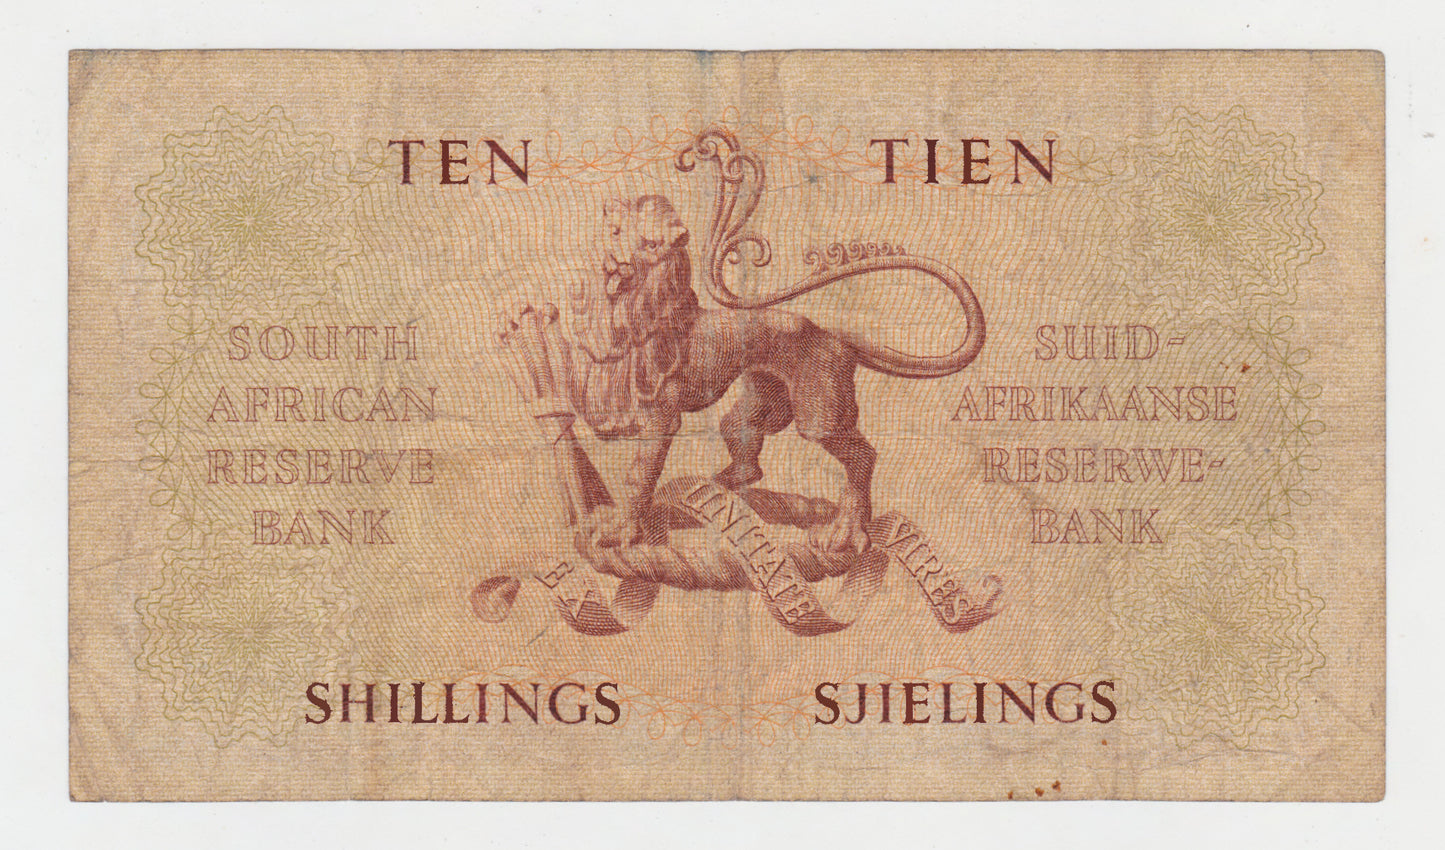 South Africa 1955 10 Shilling Banknote s/s A/104 978667